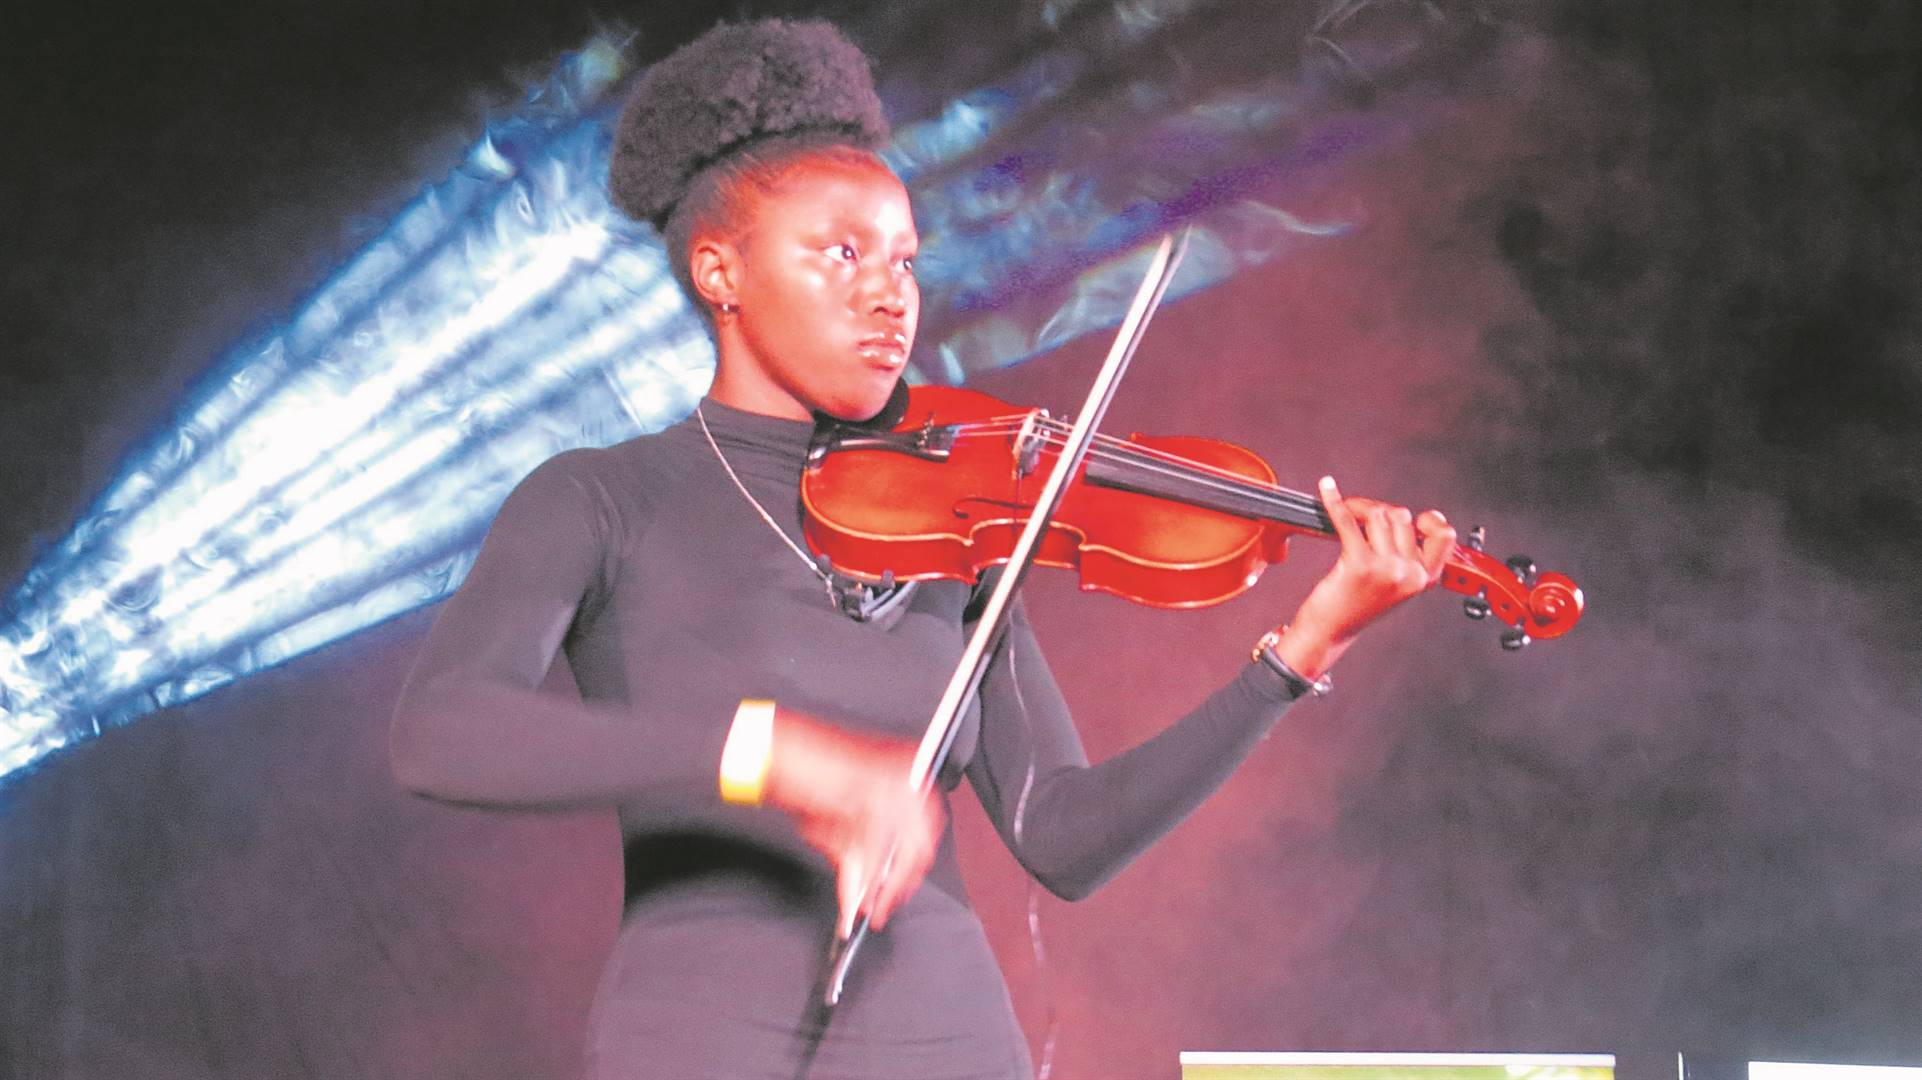 Olivia Seekoei, violinist, performing a solo at the Heidedal Music Expo held in the Norman Doubell Hall on Friday.Photos: Teboho Setena